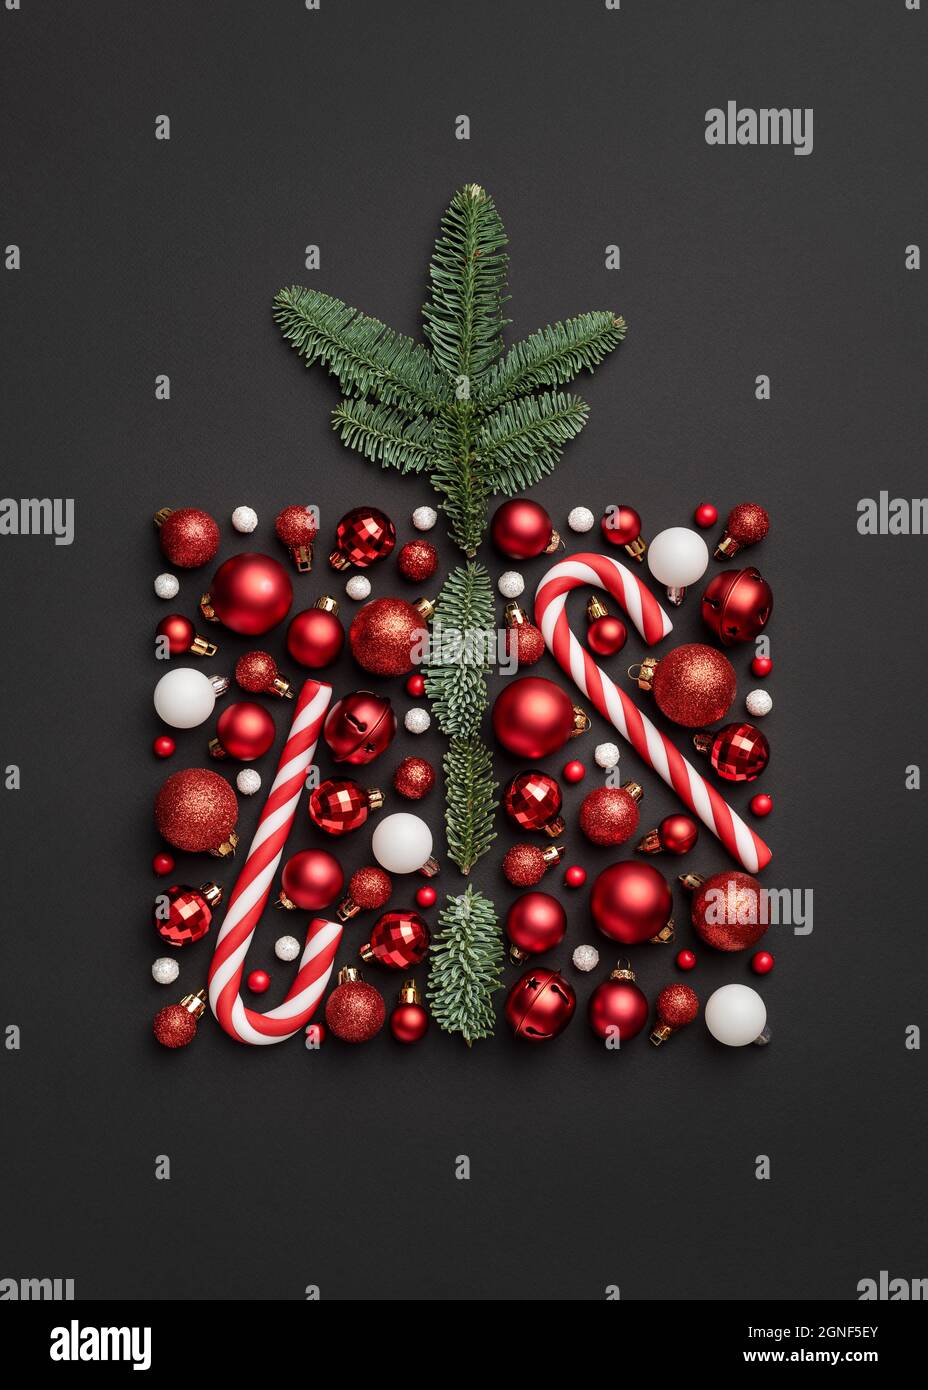 Conceptual Christmas card with holiday gift box made from a candy cane, Christmas balls, and fir tree branches on black background Stock Photo